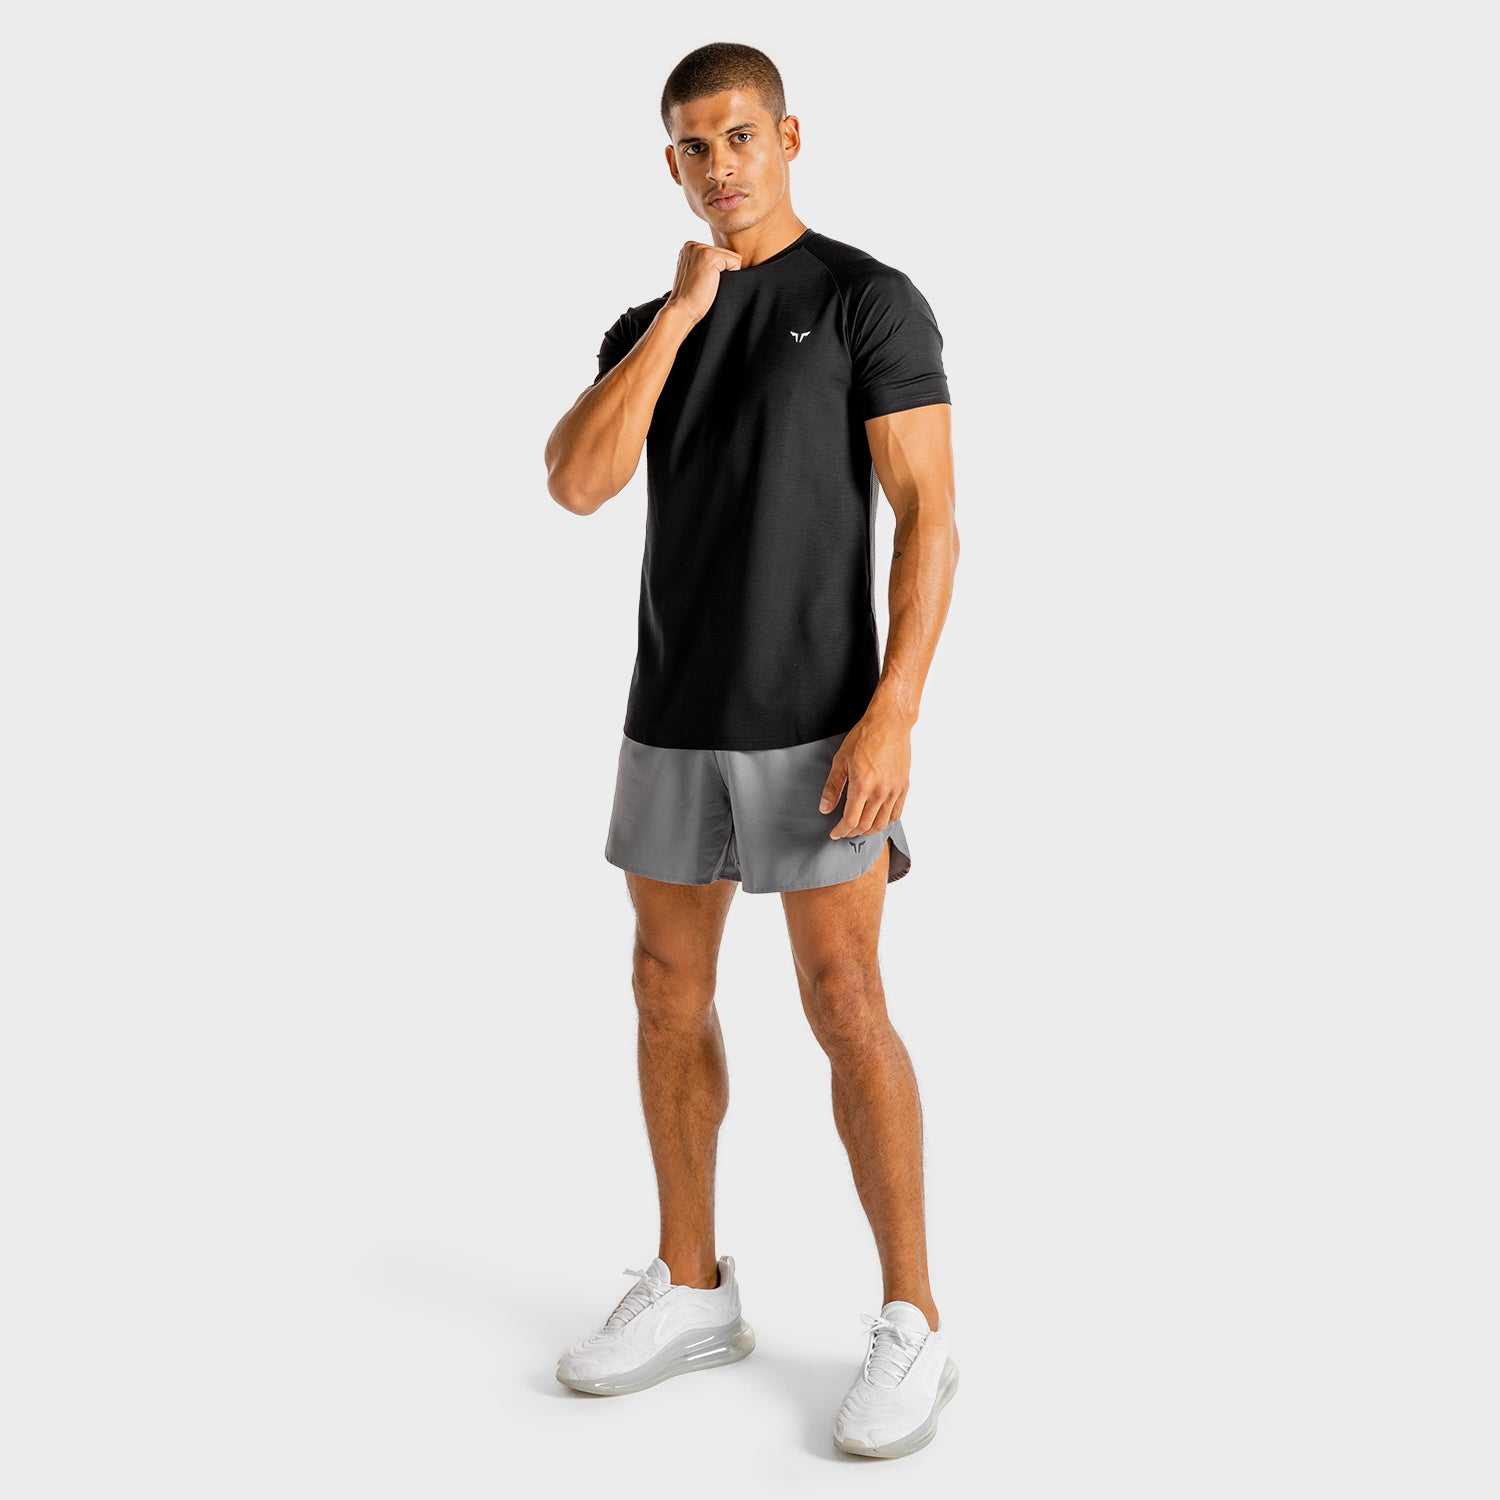 squatwolf-gym-wear-core-tee-black-workout-shirts-for-men